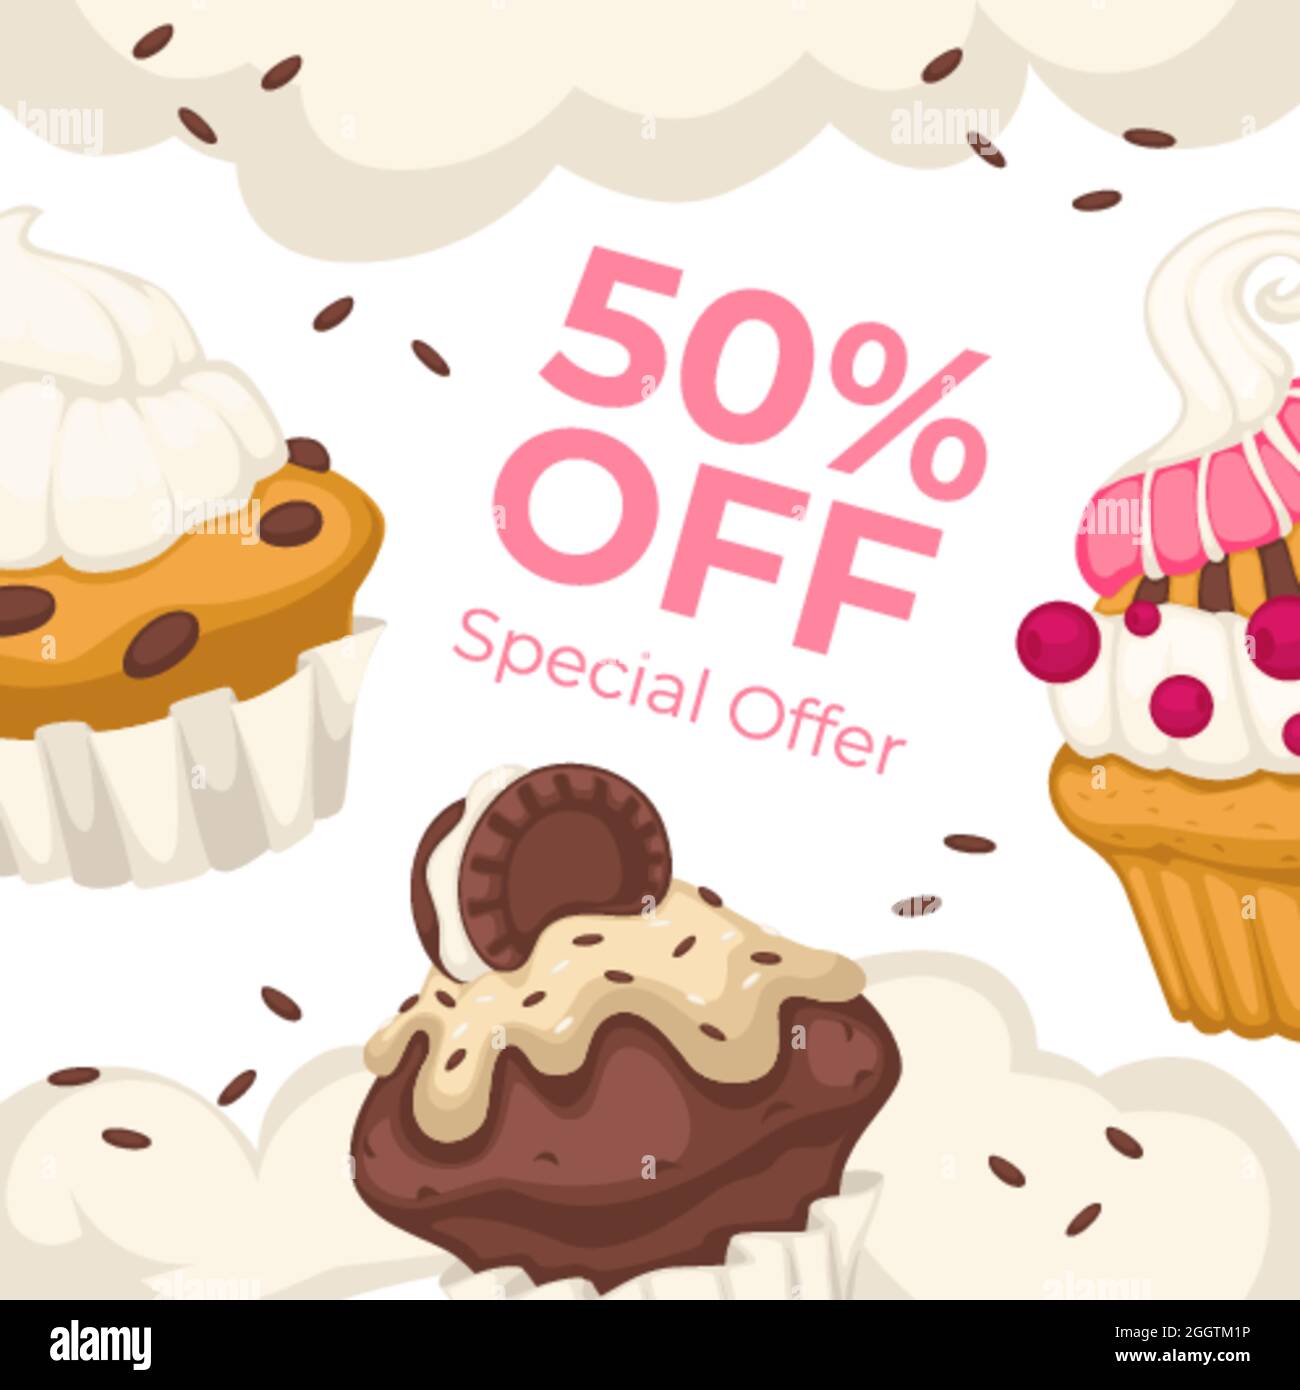 Bakery discounts and deals